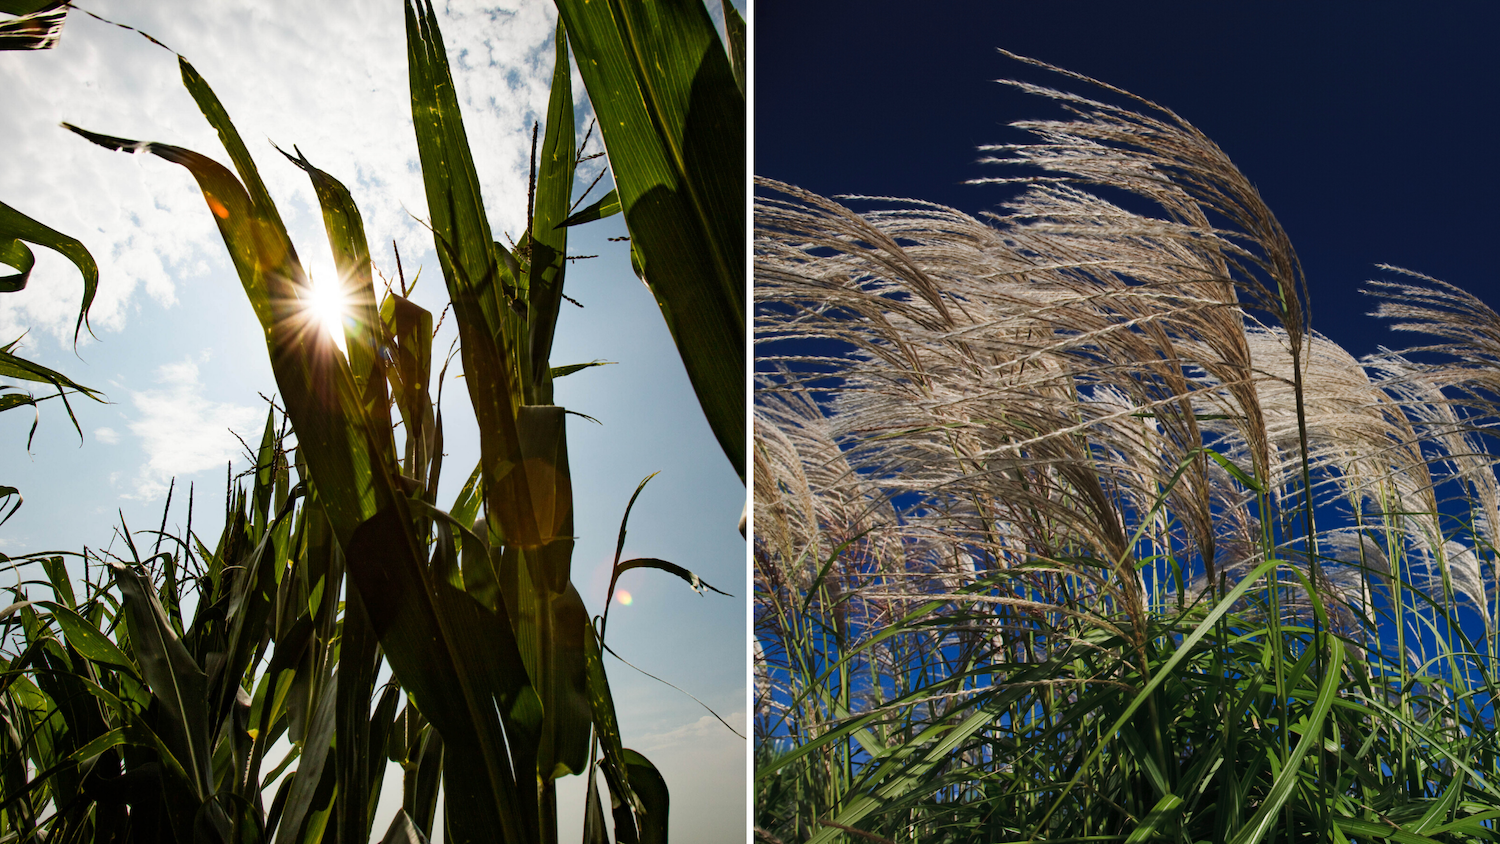 Maize and Miscanthus